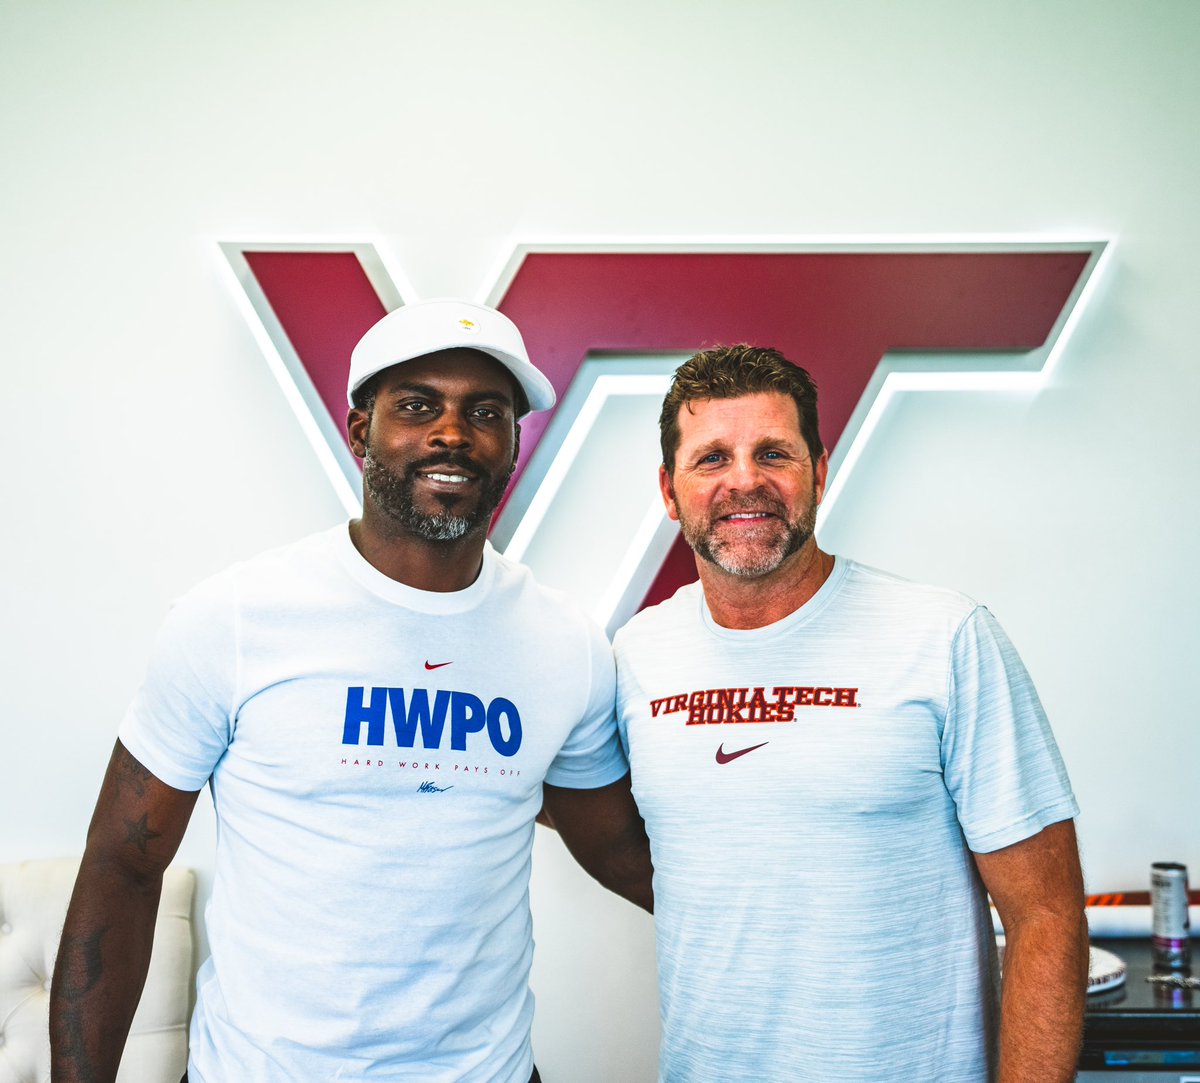 Great to have Mike back, gave a great message to our team! This Hokie brotherhood is special. 🦃 #ThisIsHome